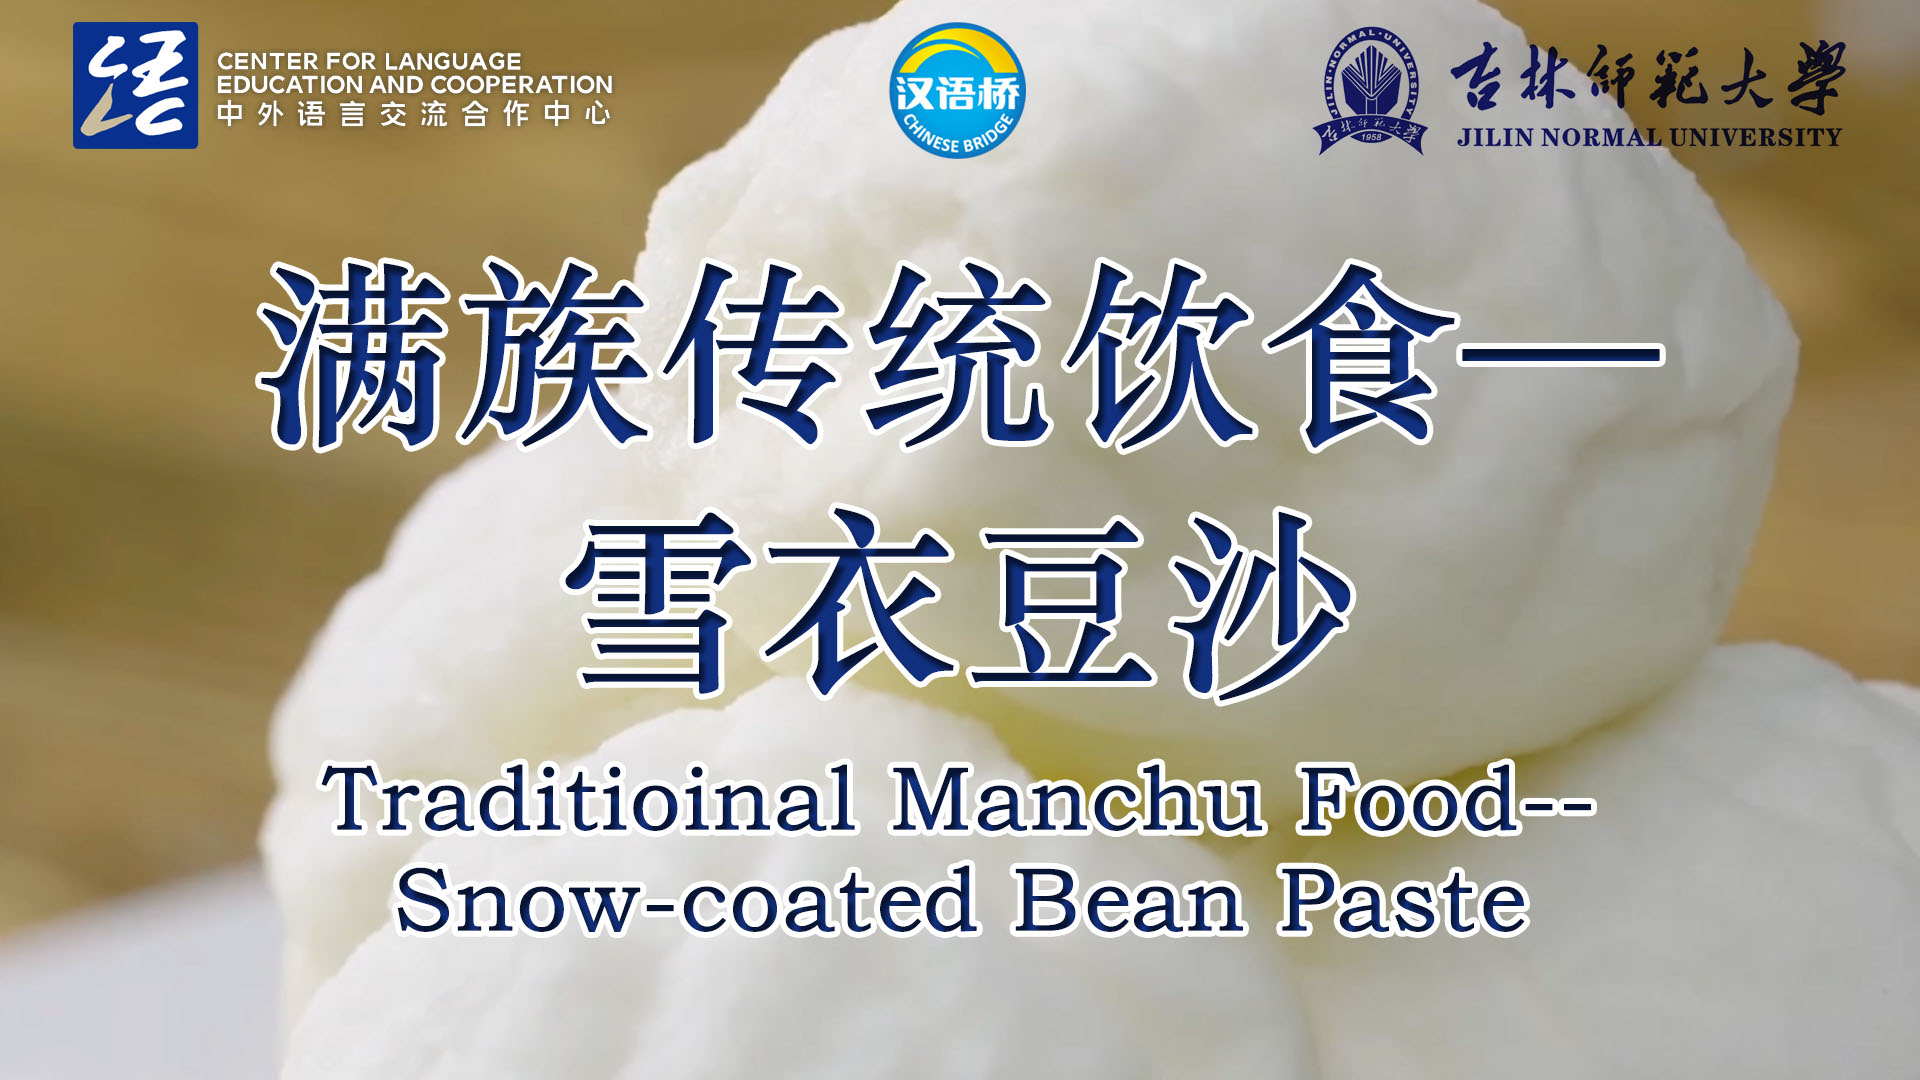 “Traditional Manchu Food-‘Snow-coated Bean Paste’”